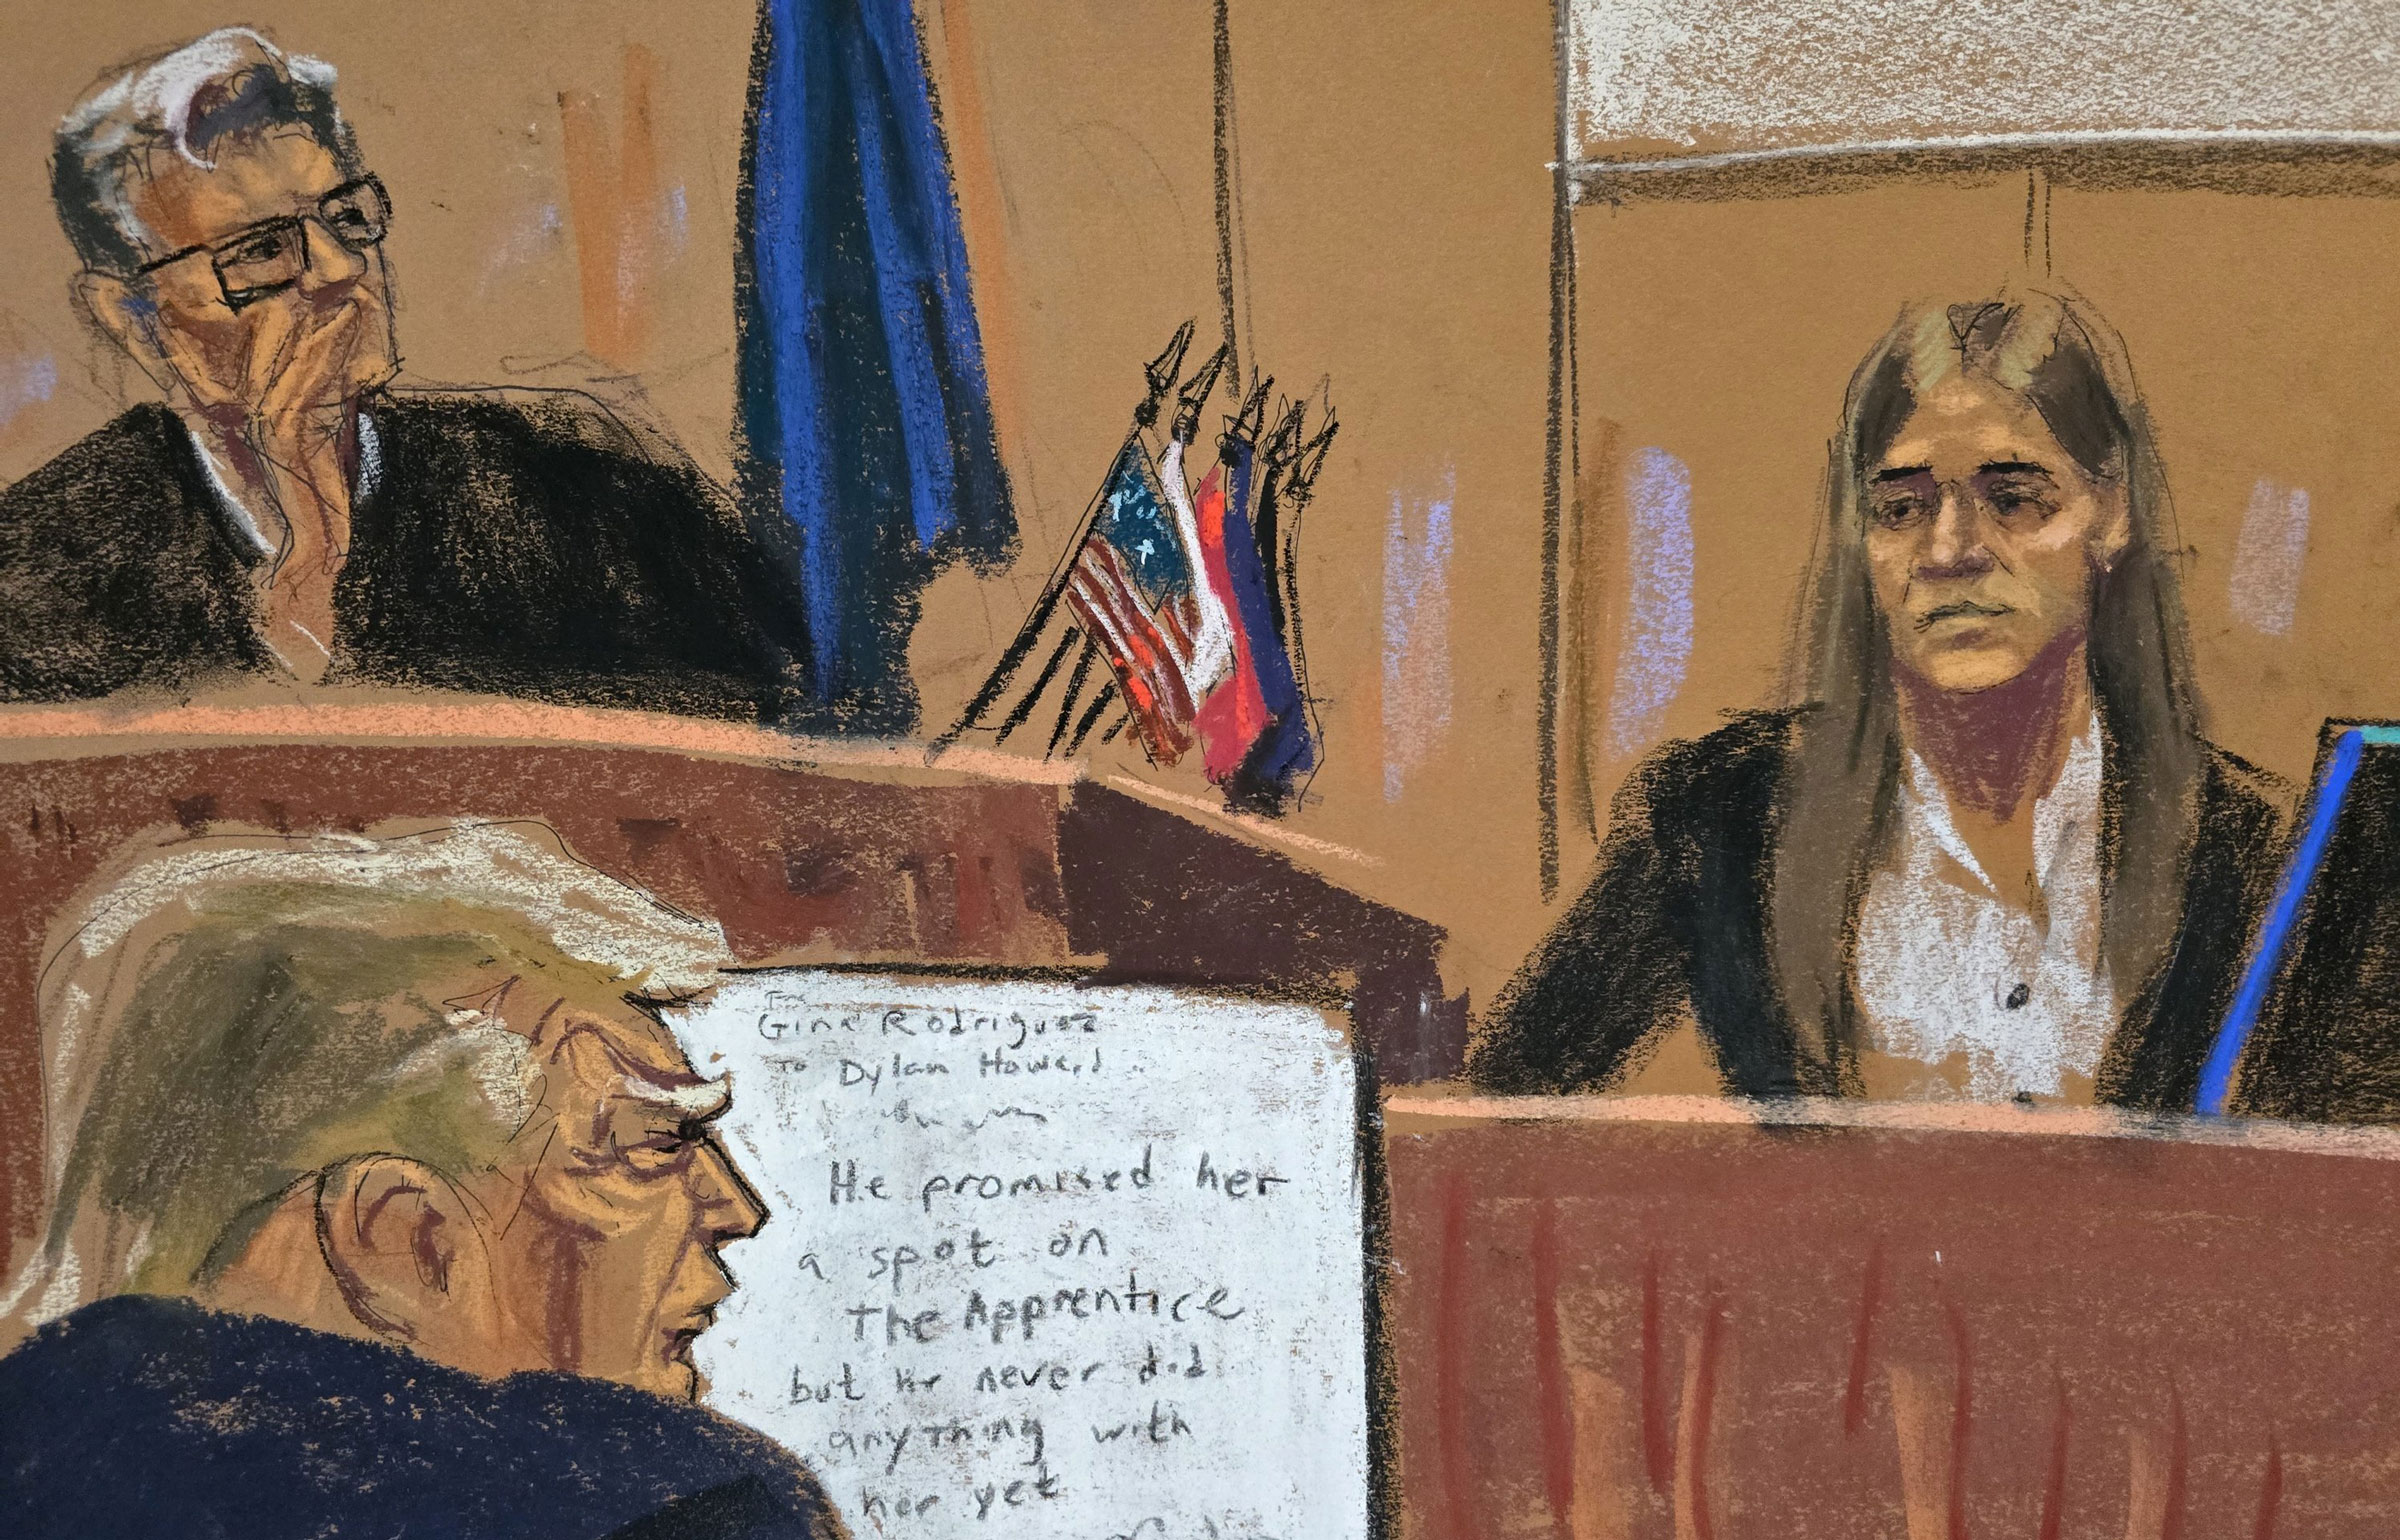 Georgia Longstreet, a paralegal in the Manhattan district attorney’s office who testified earlier in the trial, took the stand again on Friday, May 10.